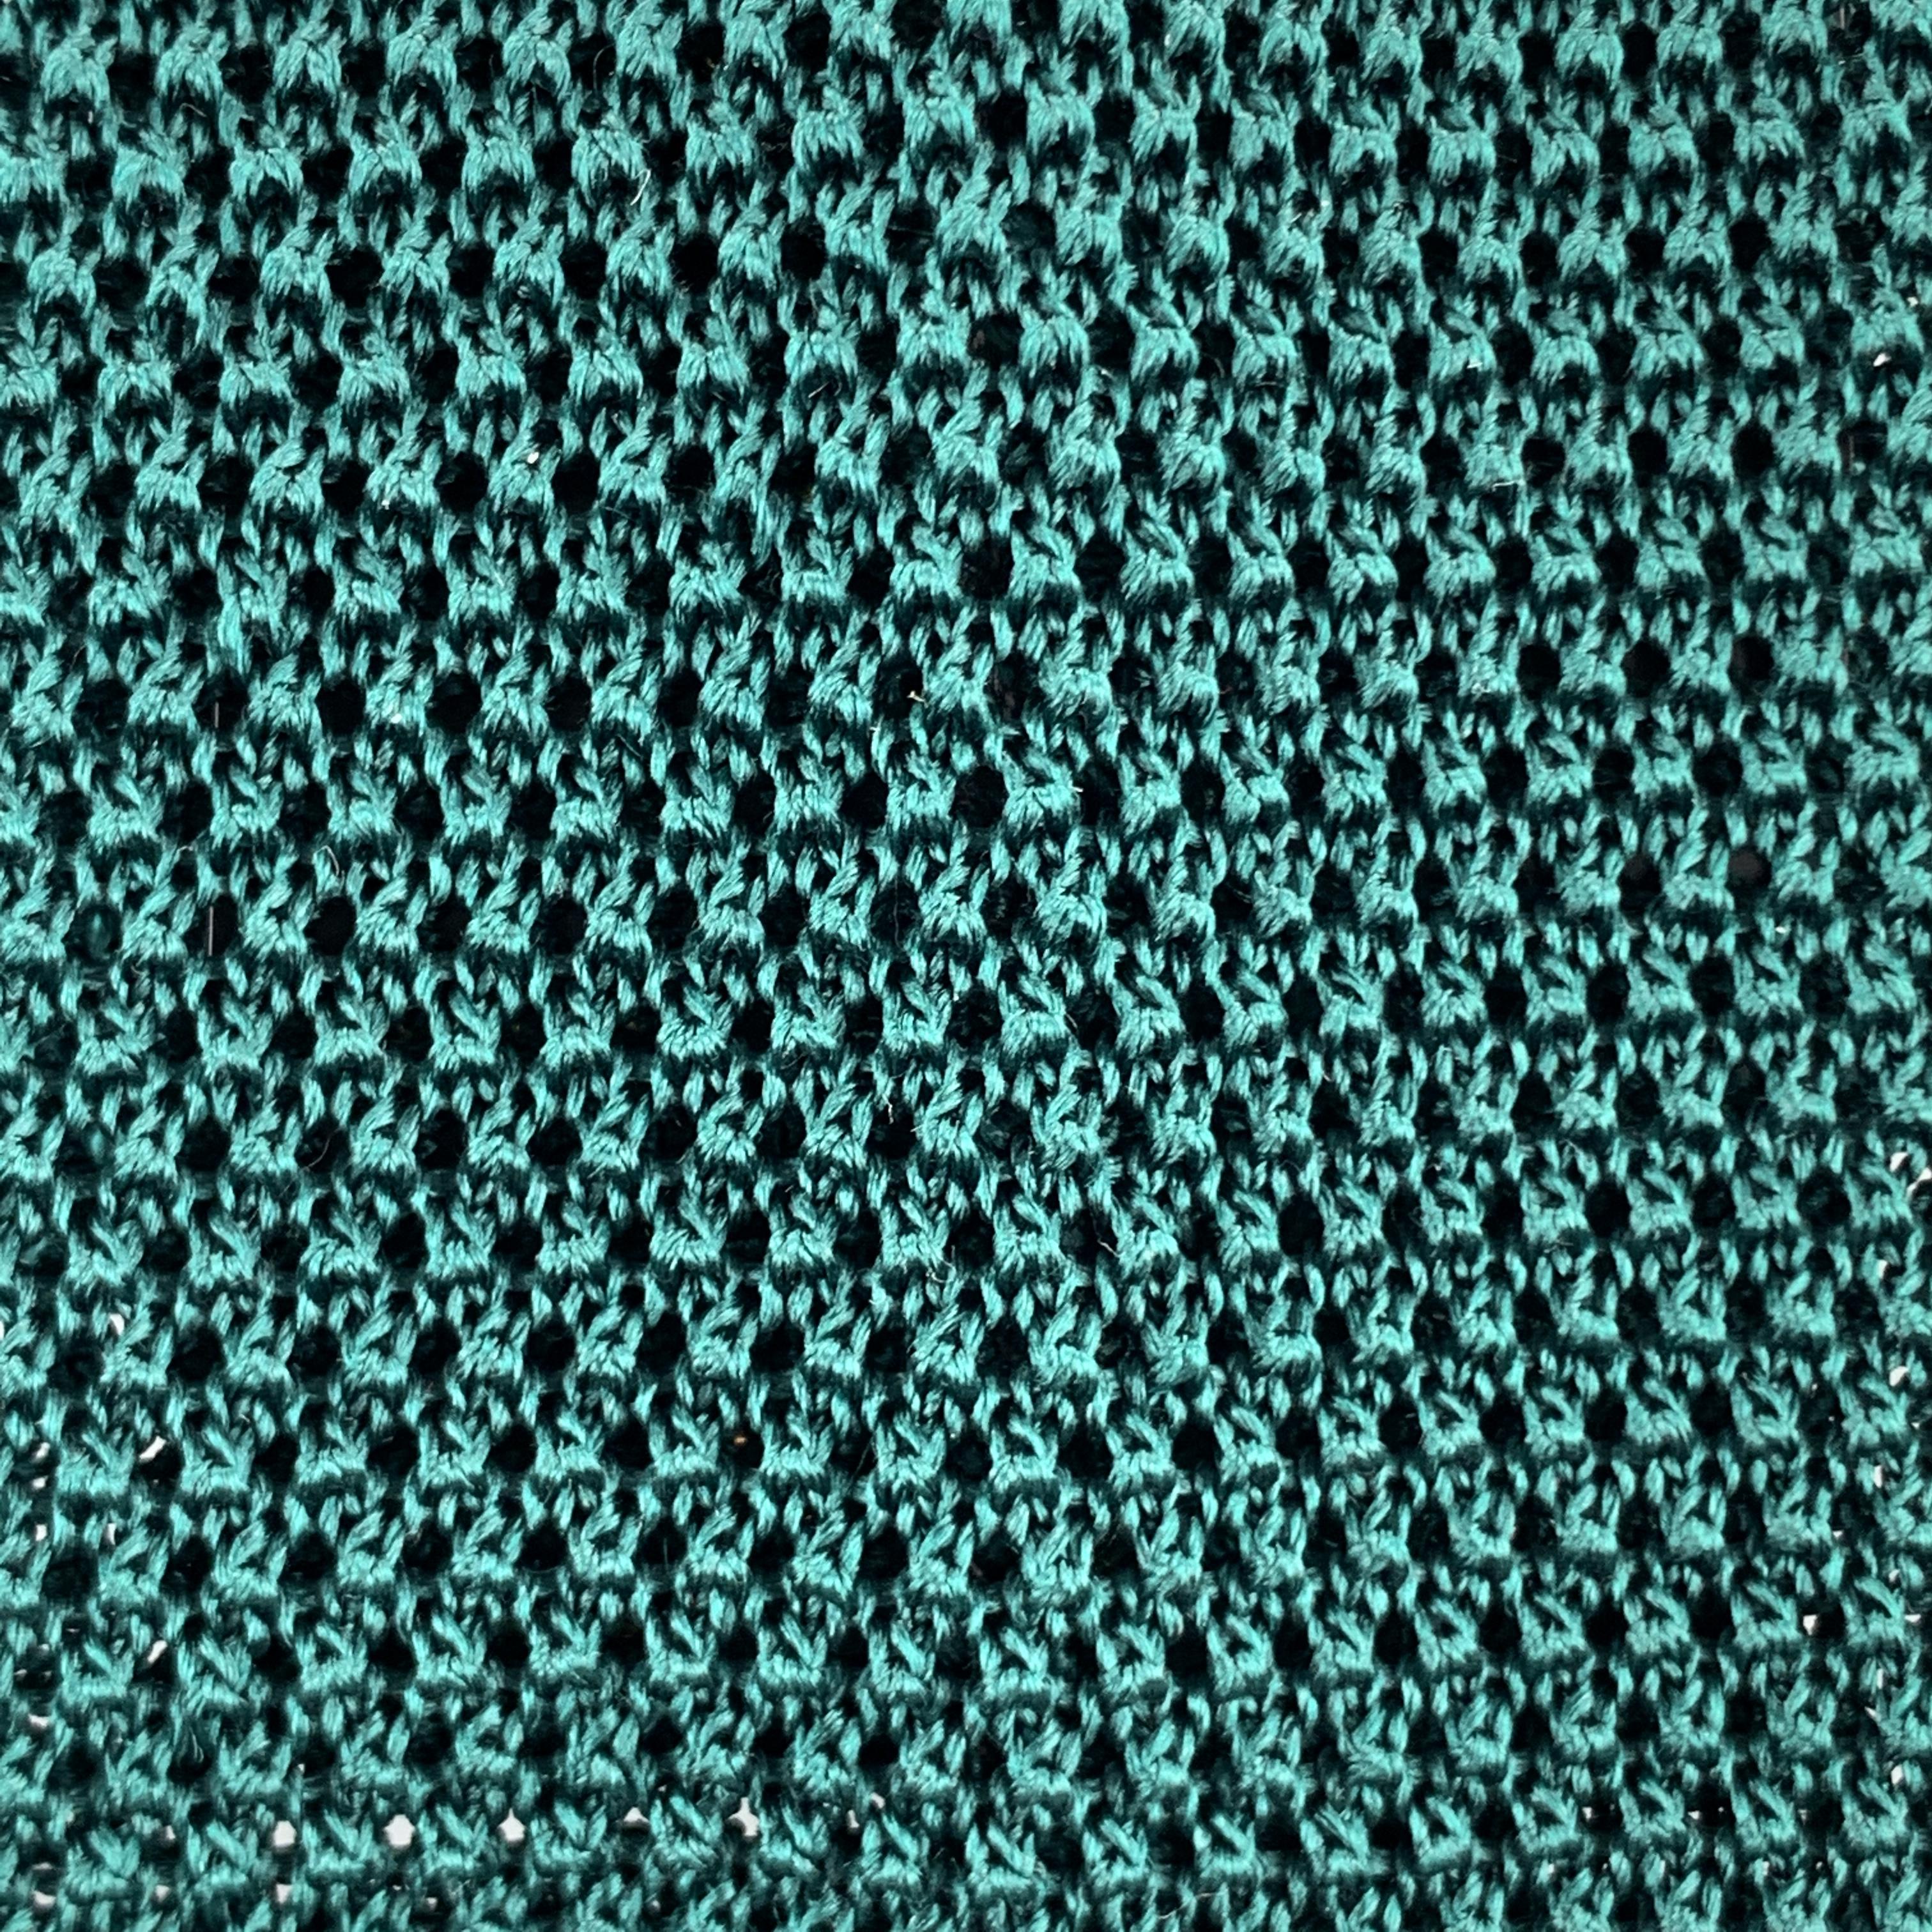 NEW & LINGWOOD necktie comes in a forest green knitted textured silk. Made in Italy. 

Excellent Pre-Owned Condition.

Width: 2.7 in 